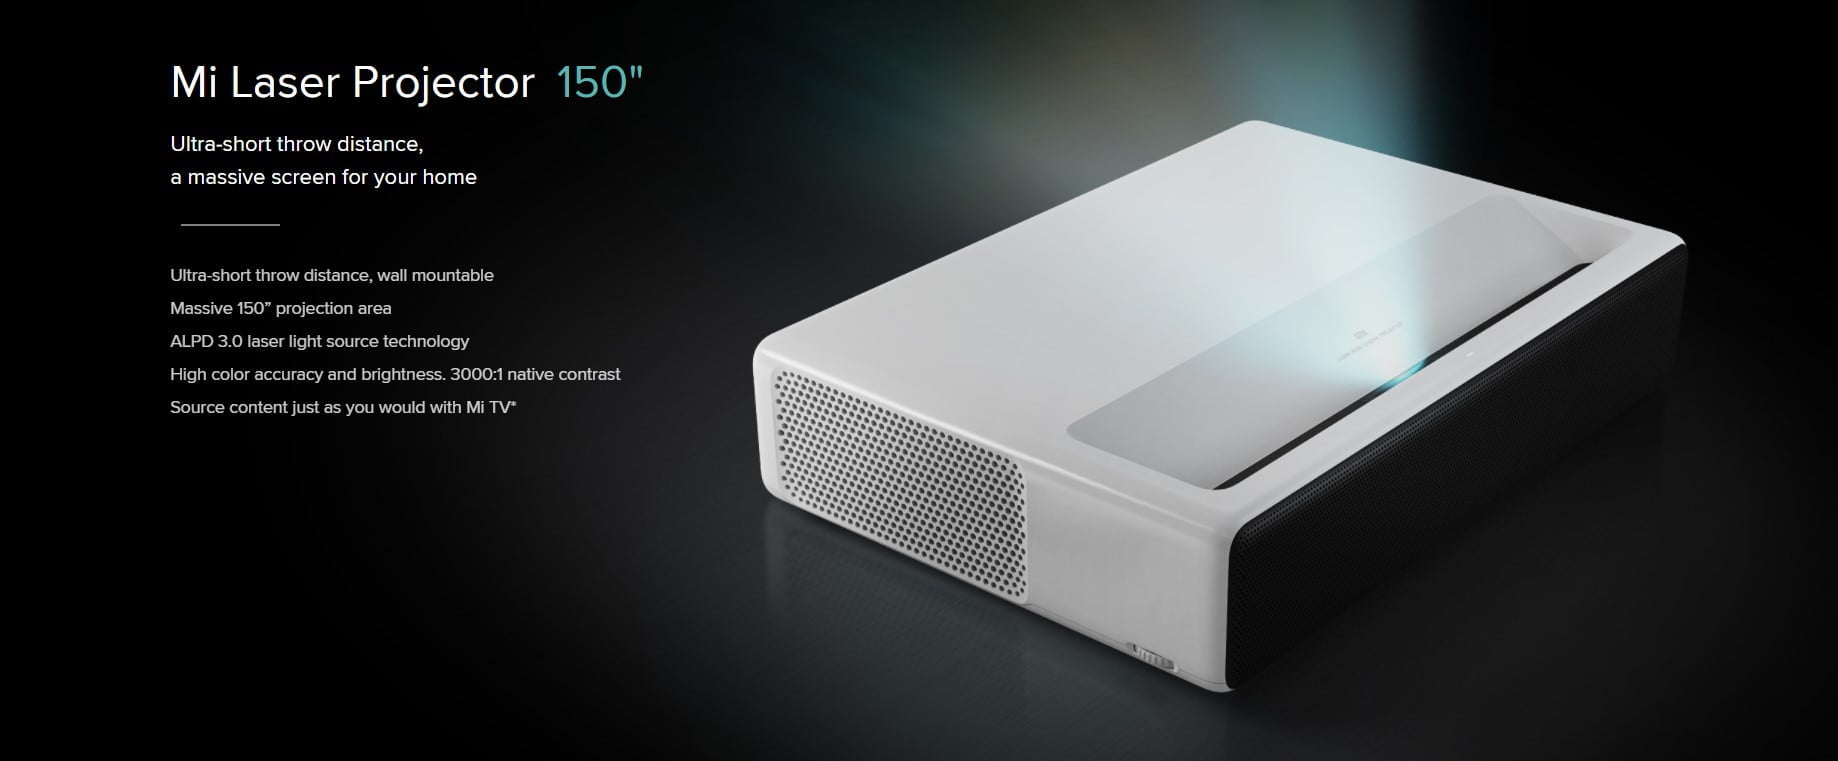 Screenshot 2022 03 30 173105 Xiaomi &Lt;H1&Gt;Mi 4K Laser Projector 150''&Lt;/H1&Gt; Https://Www.youtube.com/Watch?V=Vhplxv8K5Va This Is The World'S First Ultra-Short-Throw Projector With Advanced Laser Display (Alpd) Technology, Which Delivers Up To 150 Inches Of 4K Quality Images From A Distance Of 50 Centimeters, With 1600 Lumens And 3000:1 Contrast Quality, And Product Life Up To 25,000 Hours. To Achieve User-Friendly Design Goals, The High-Tech Product Uses A Compact, Minimalist &Quot;Box&Quot; Design Language, And Carefully Maintains Consistency Between The Host Style And The Bluetooth Remote Control Design. Control The Host From Any Corner Of The Room. Voice Assistant Quickly Find Programs And Other Interactive Ways For The User To Bring A New Movie Viewing Experience. 4K Laser Projector Mi 4K Laser Projector 150''